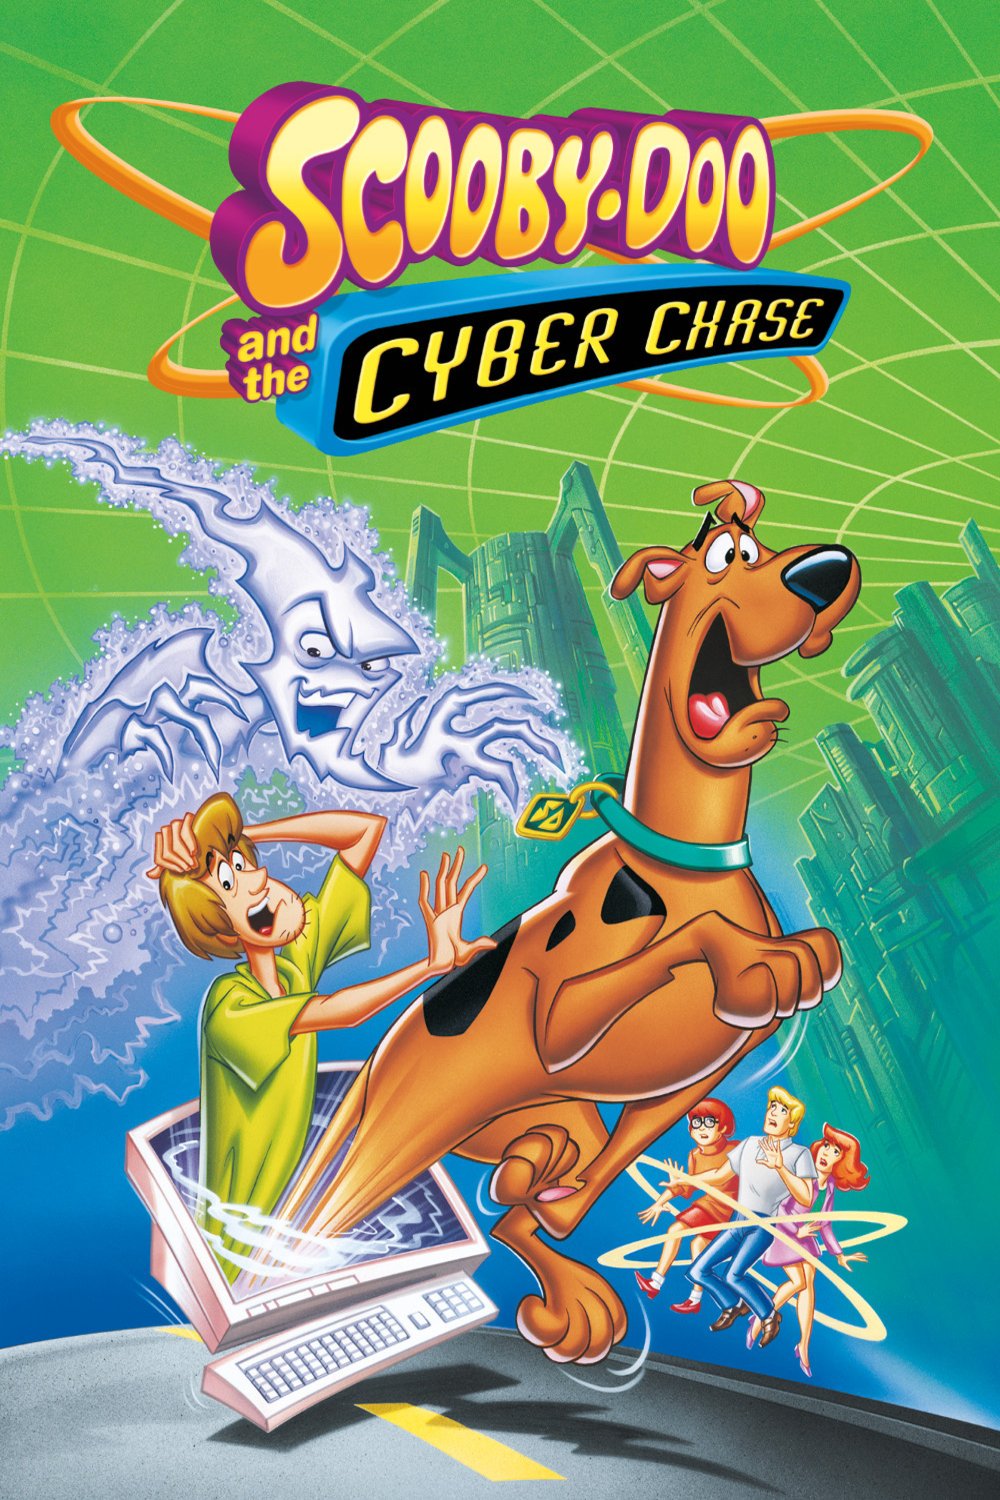 Poster of the movie Scooby-Doo and the Cyber Chase